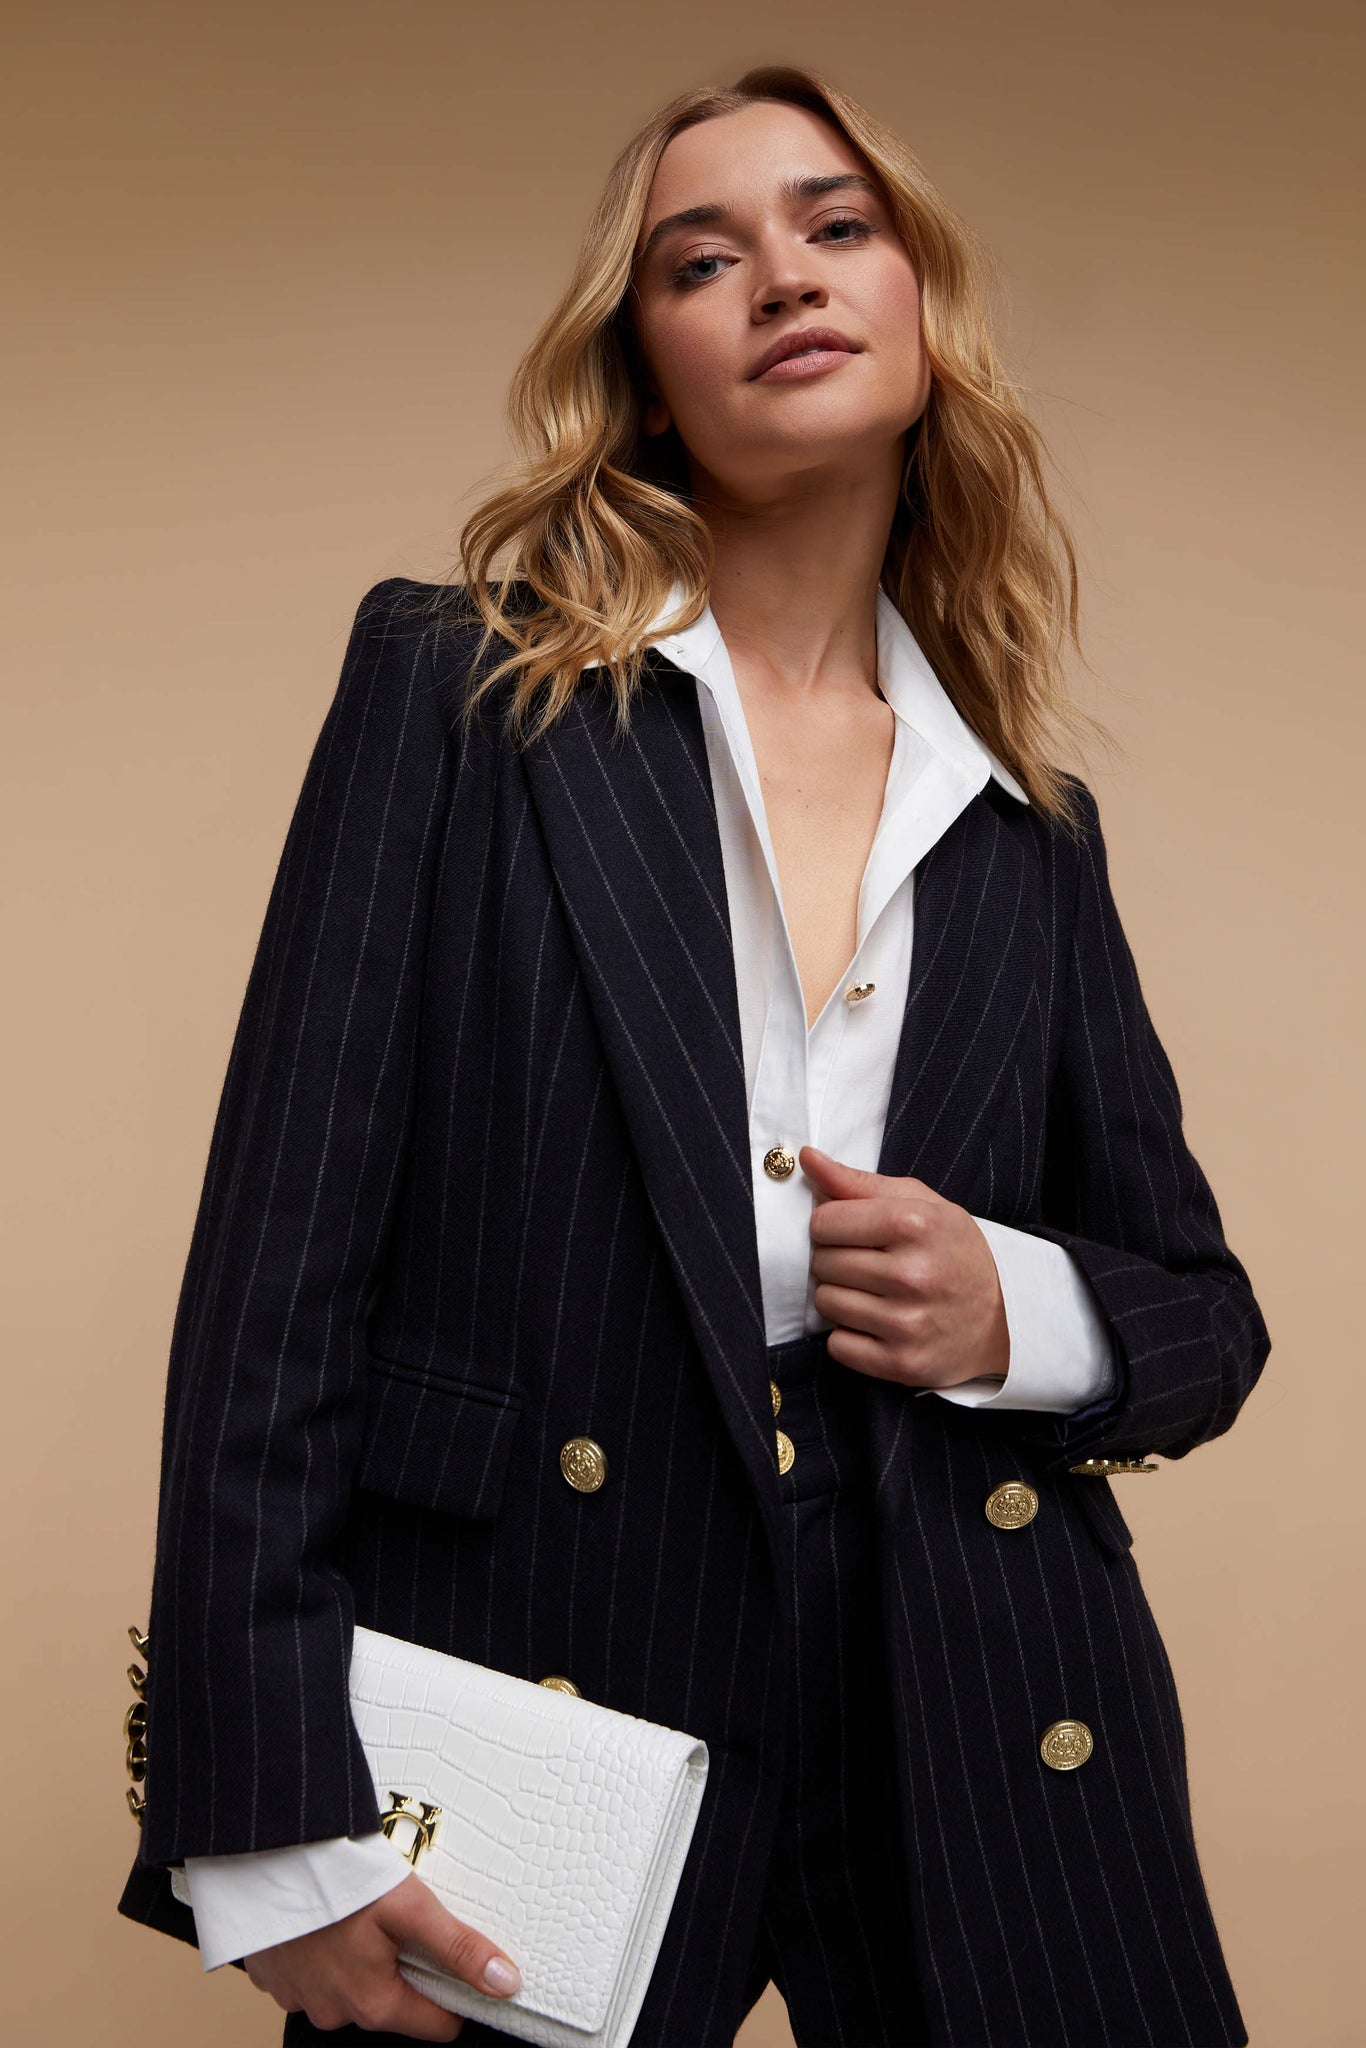 double breasted wool blazer in navy and cream chalk pinstripe with two hip pockets and gold button detials down front and on cuffs and handmade in the uk worn with classic white shirt tailored trousers in matching pinstripe and white clutch bag